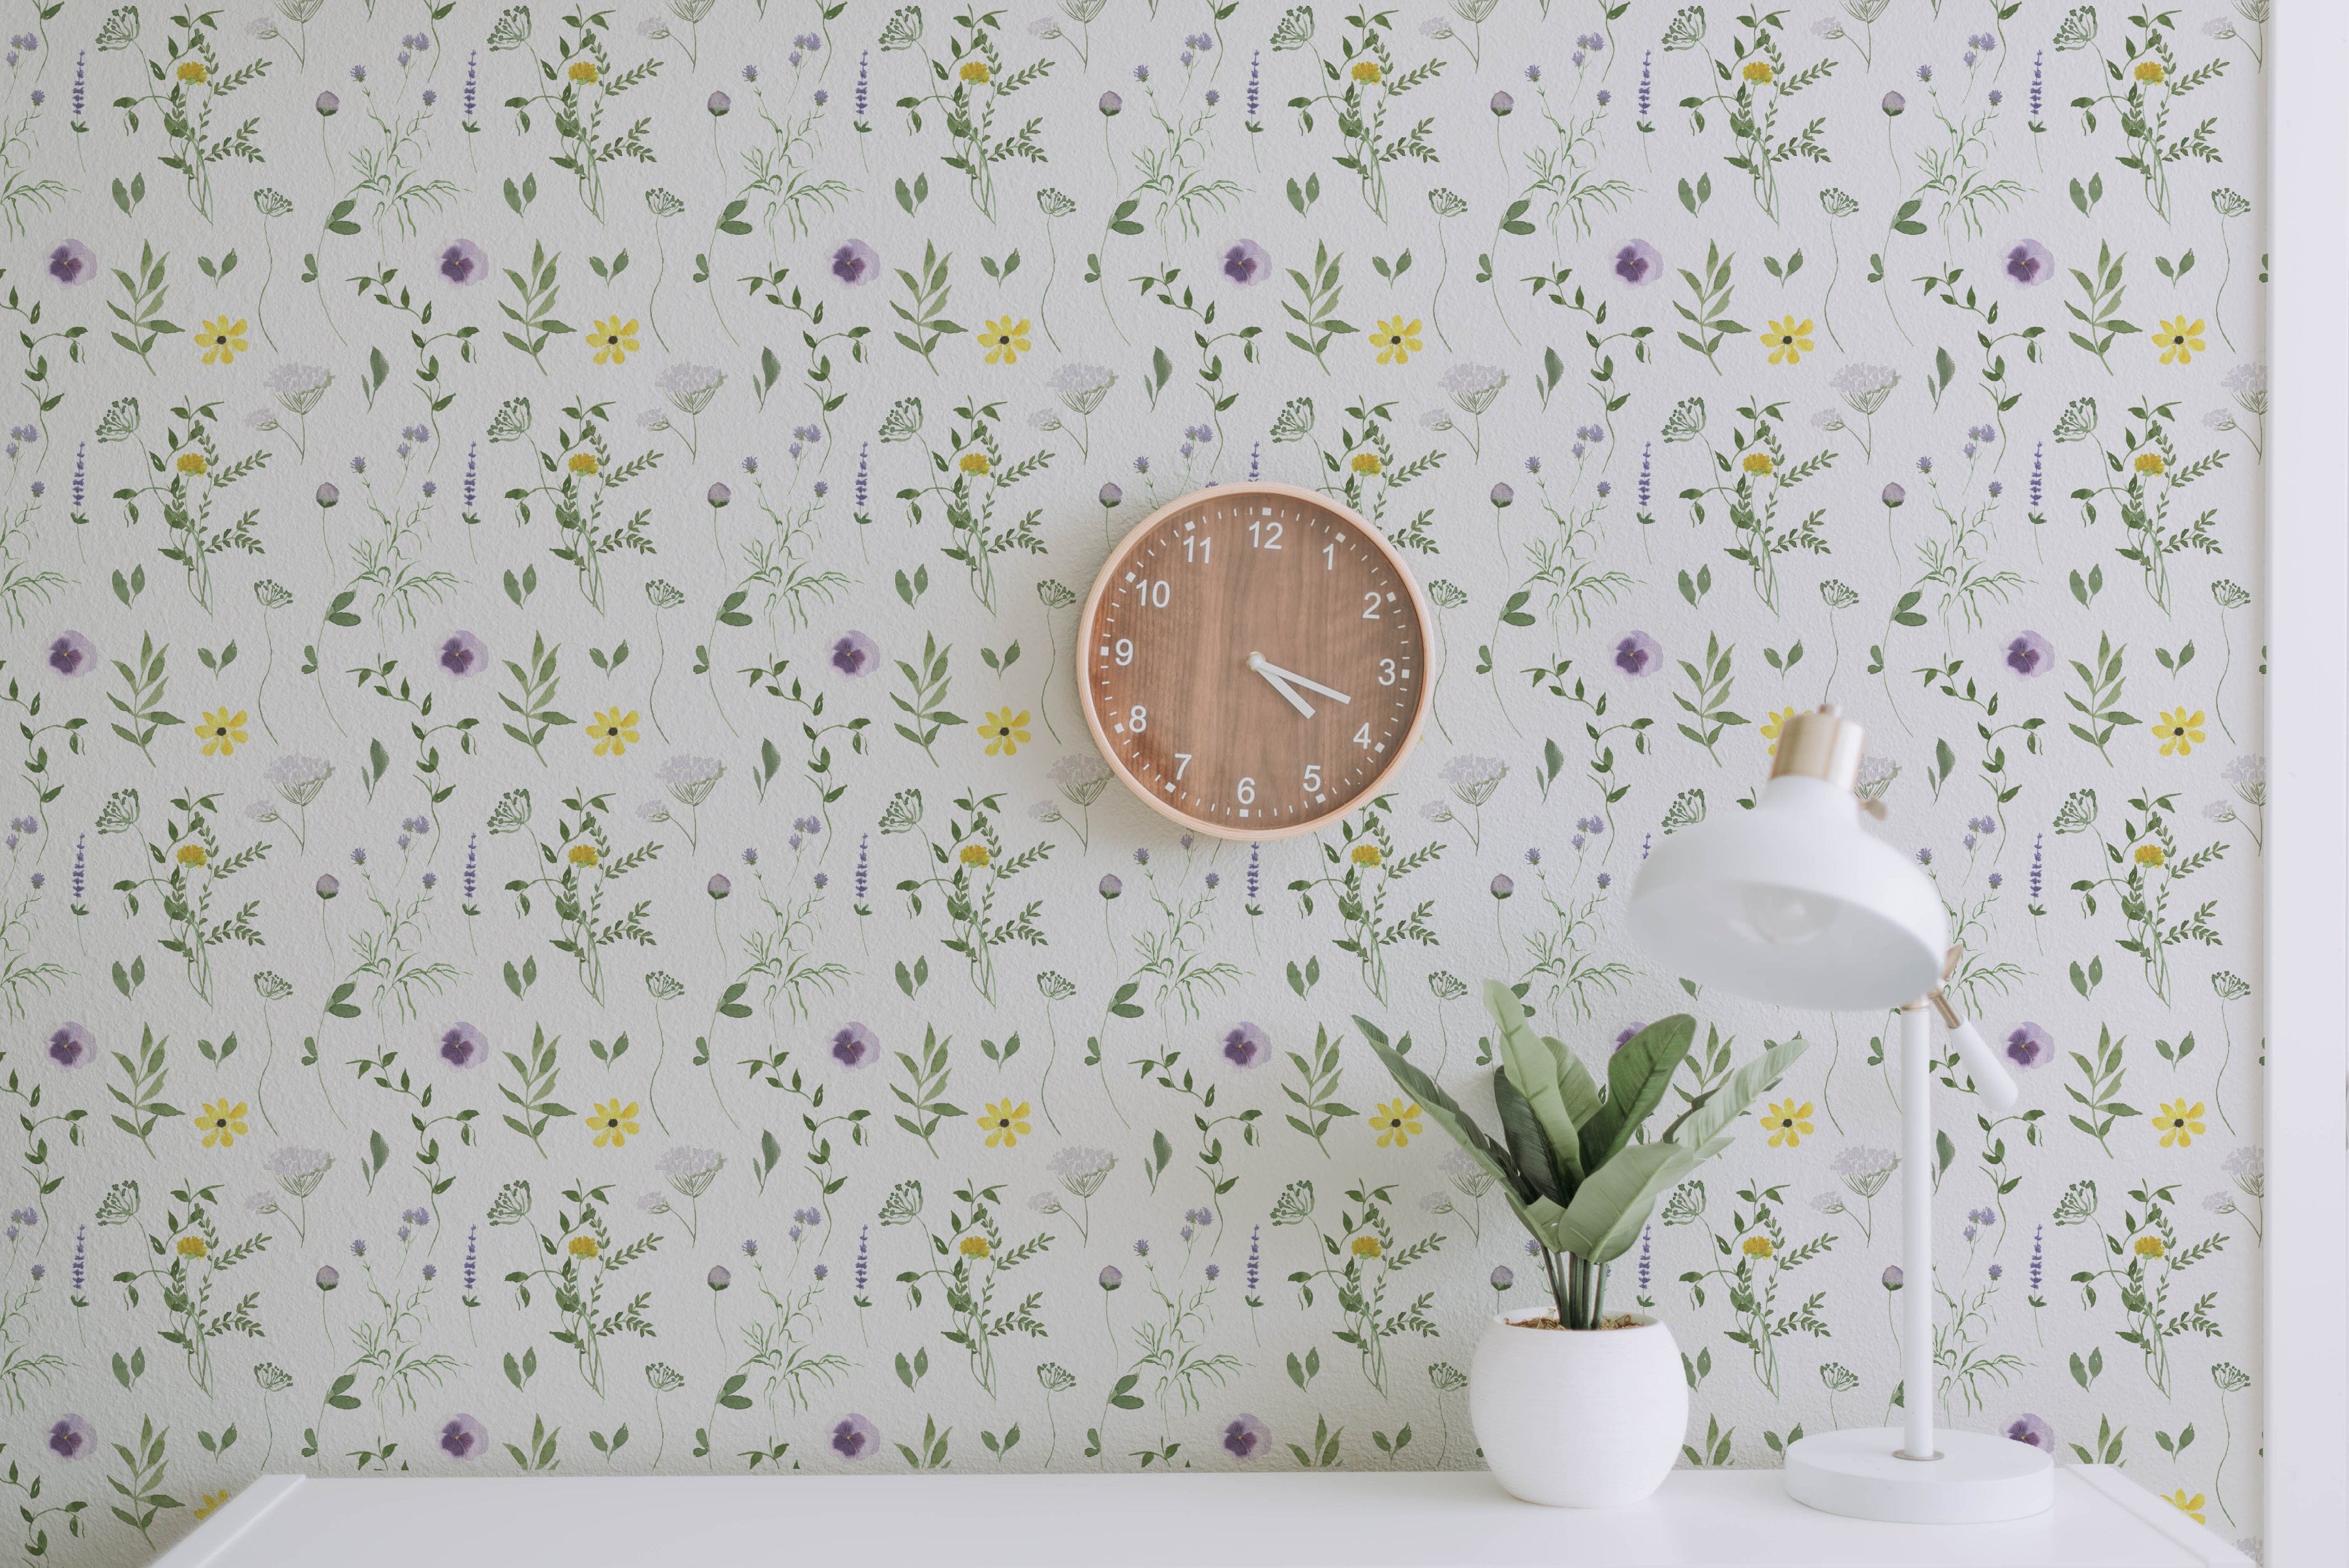 A workspace featuring the Spring Field Wallpaper - VII with a white background adorned with delicate purple and yellow flowers and green leaves. The decor includes a wooden wall clock and a white desk lamp beside a small plant in a white pot